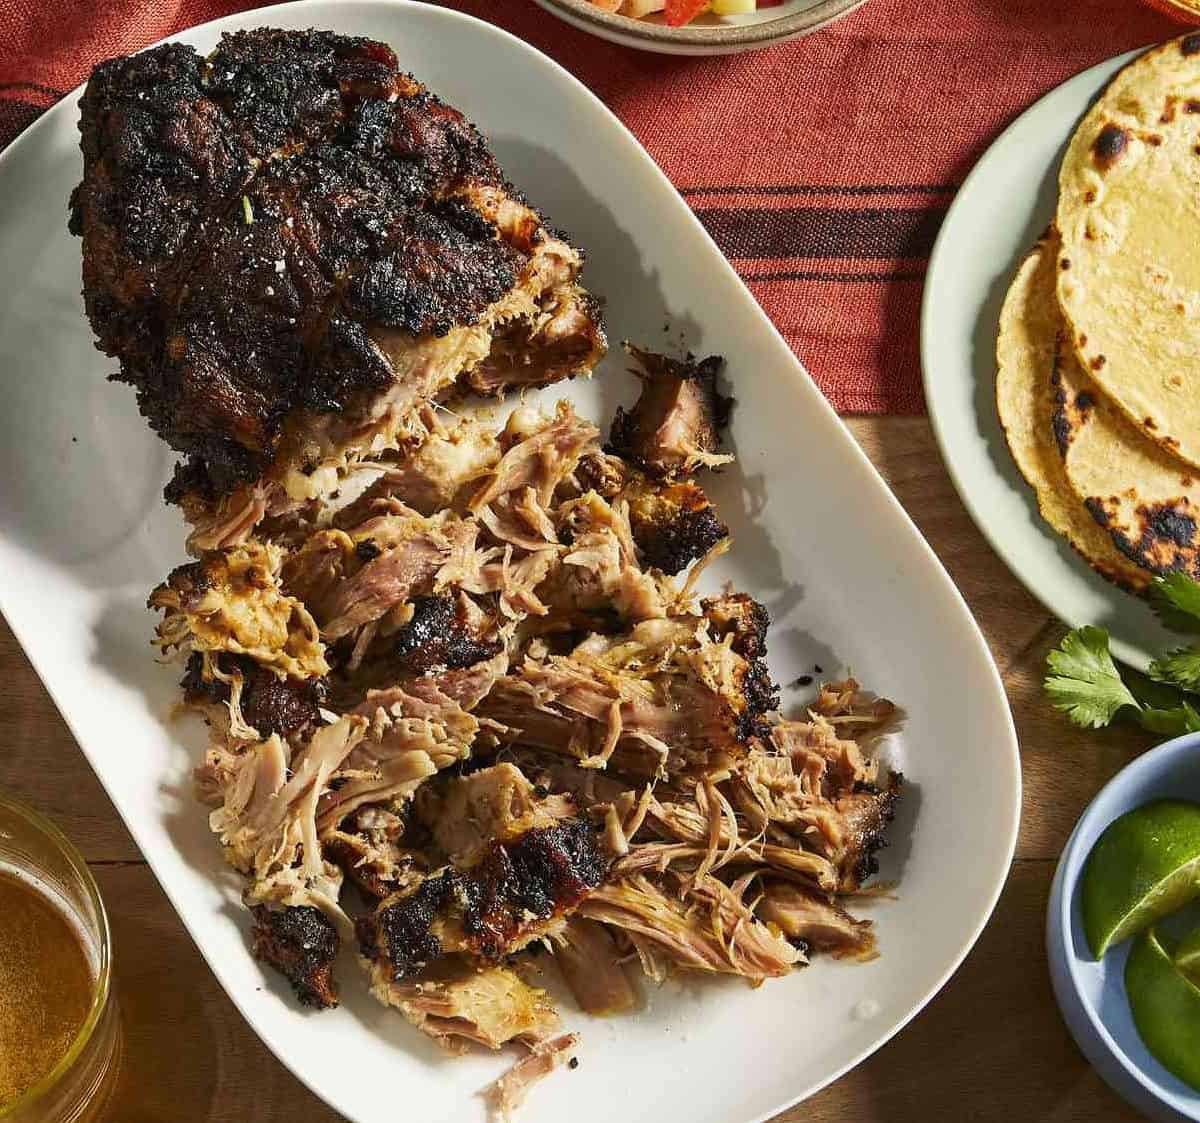  A tasty and flavorful way to switch up your normal pork shoulder routine.